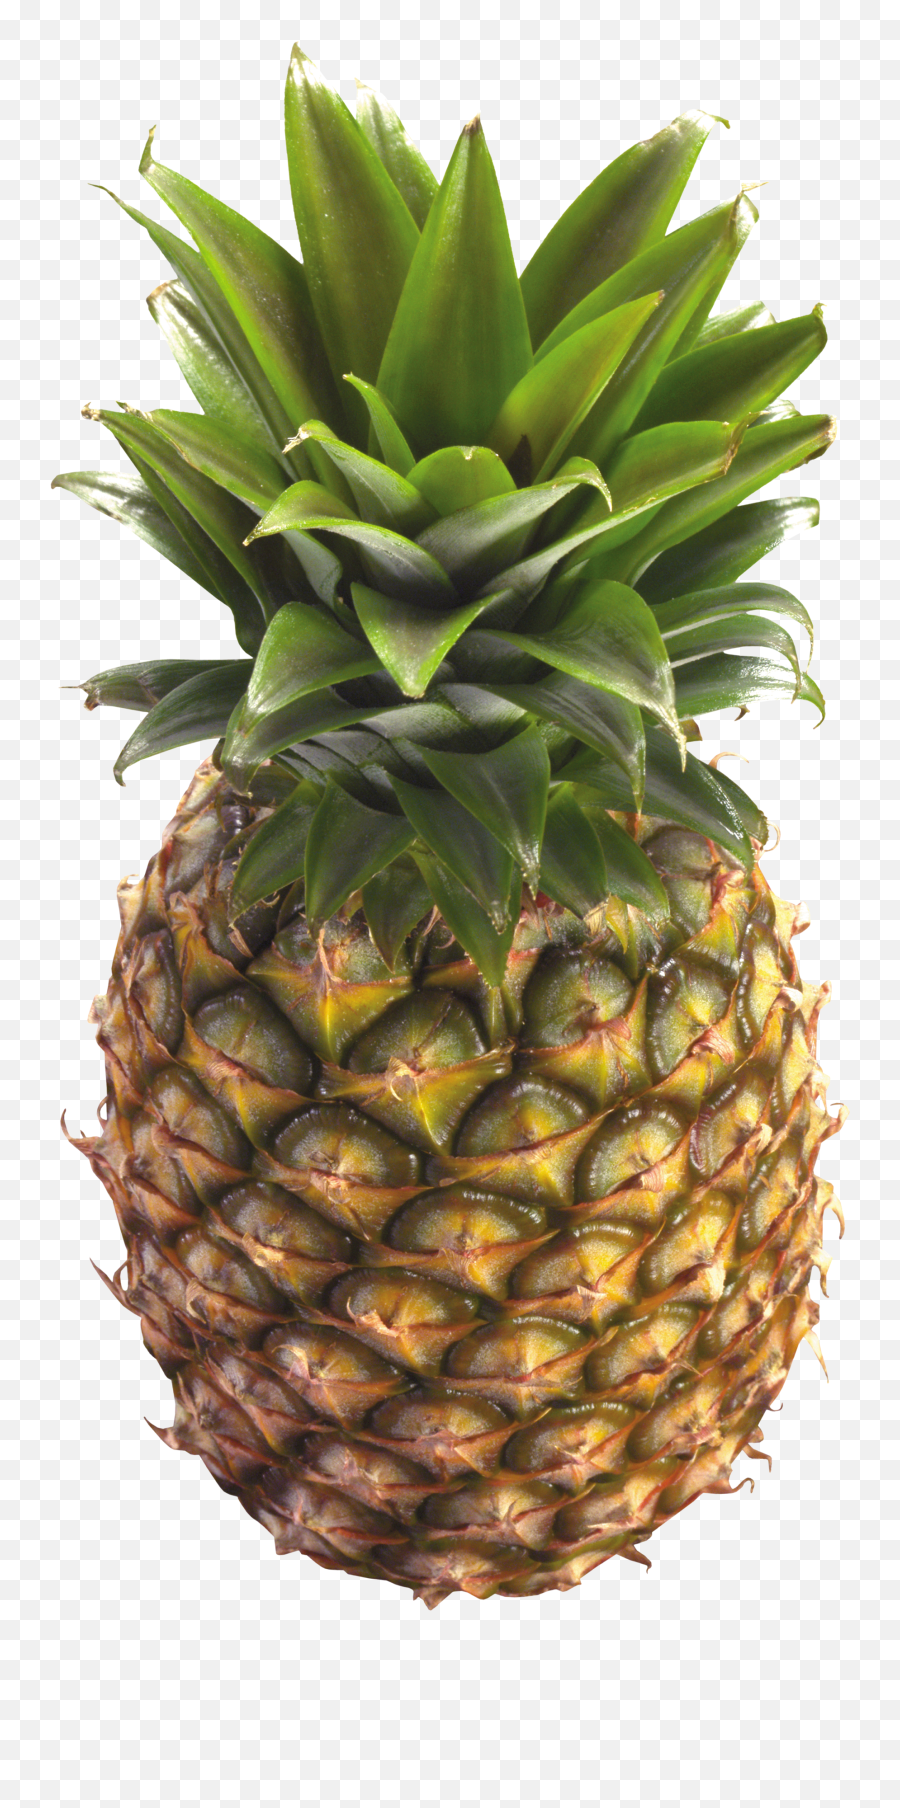 Pineapple Png Images Free Pictures Download - Pineapple Blank Background Emoji,Pinapple Emoji